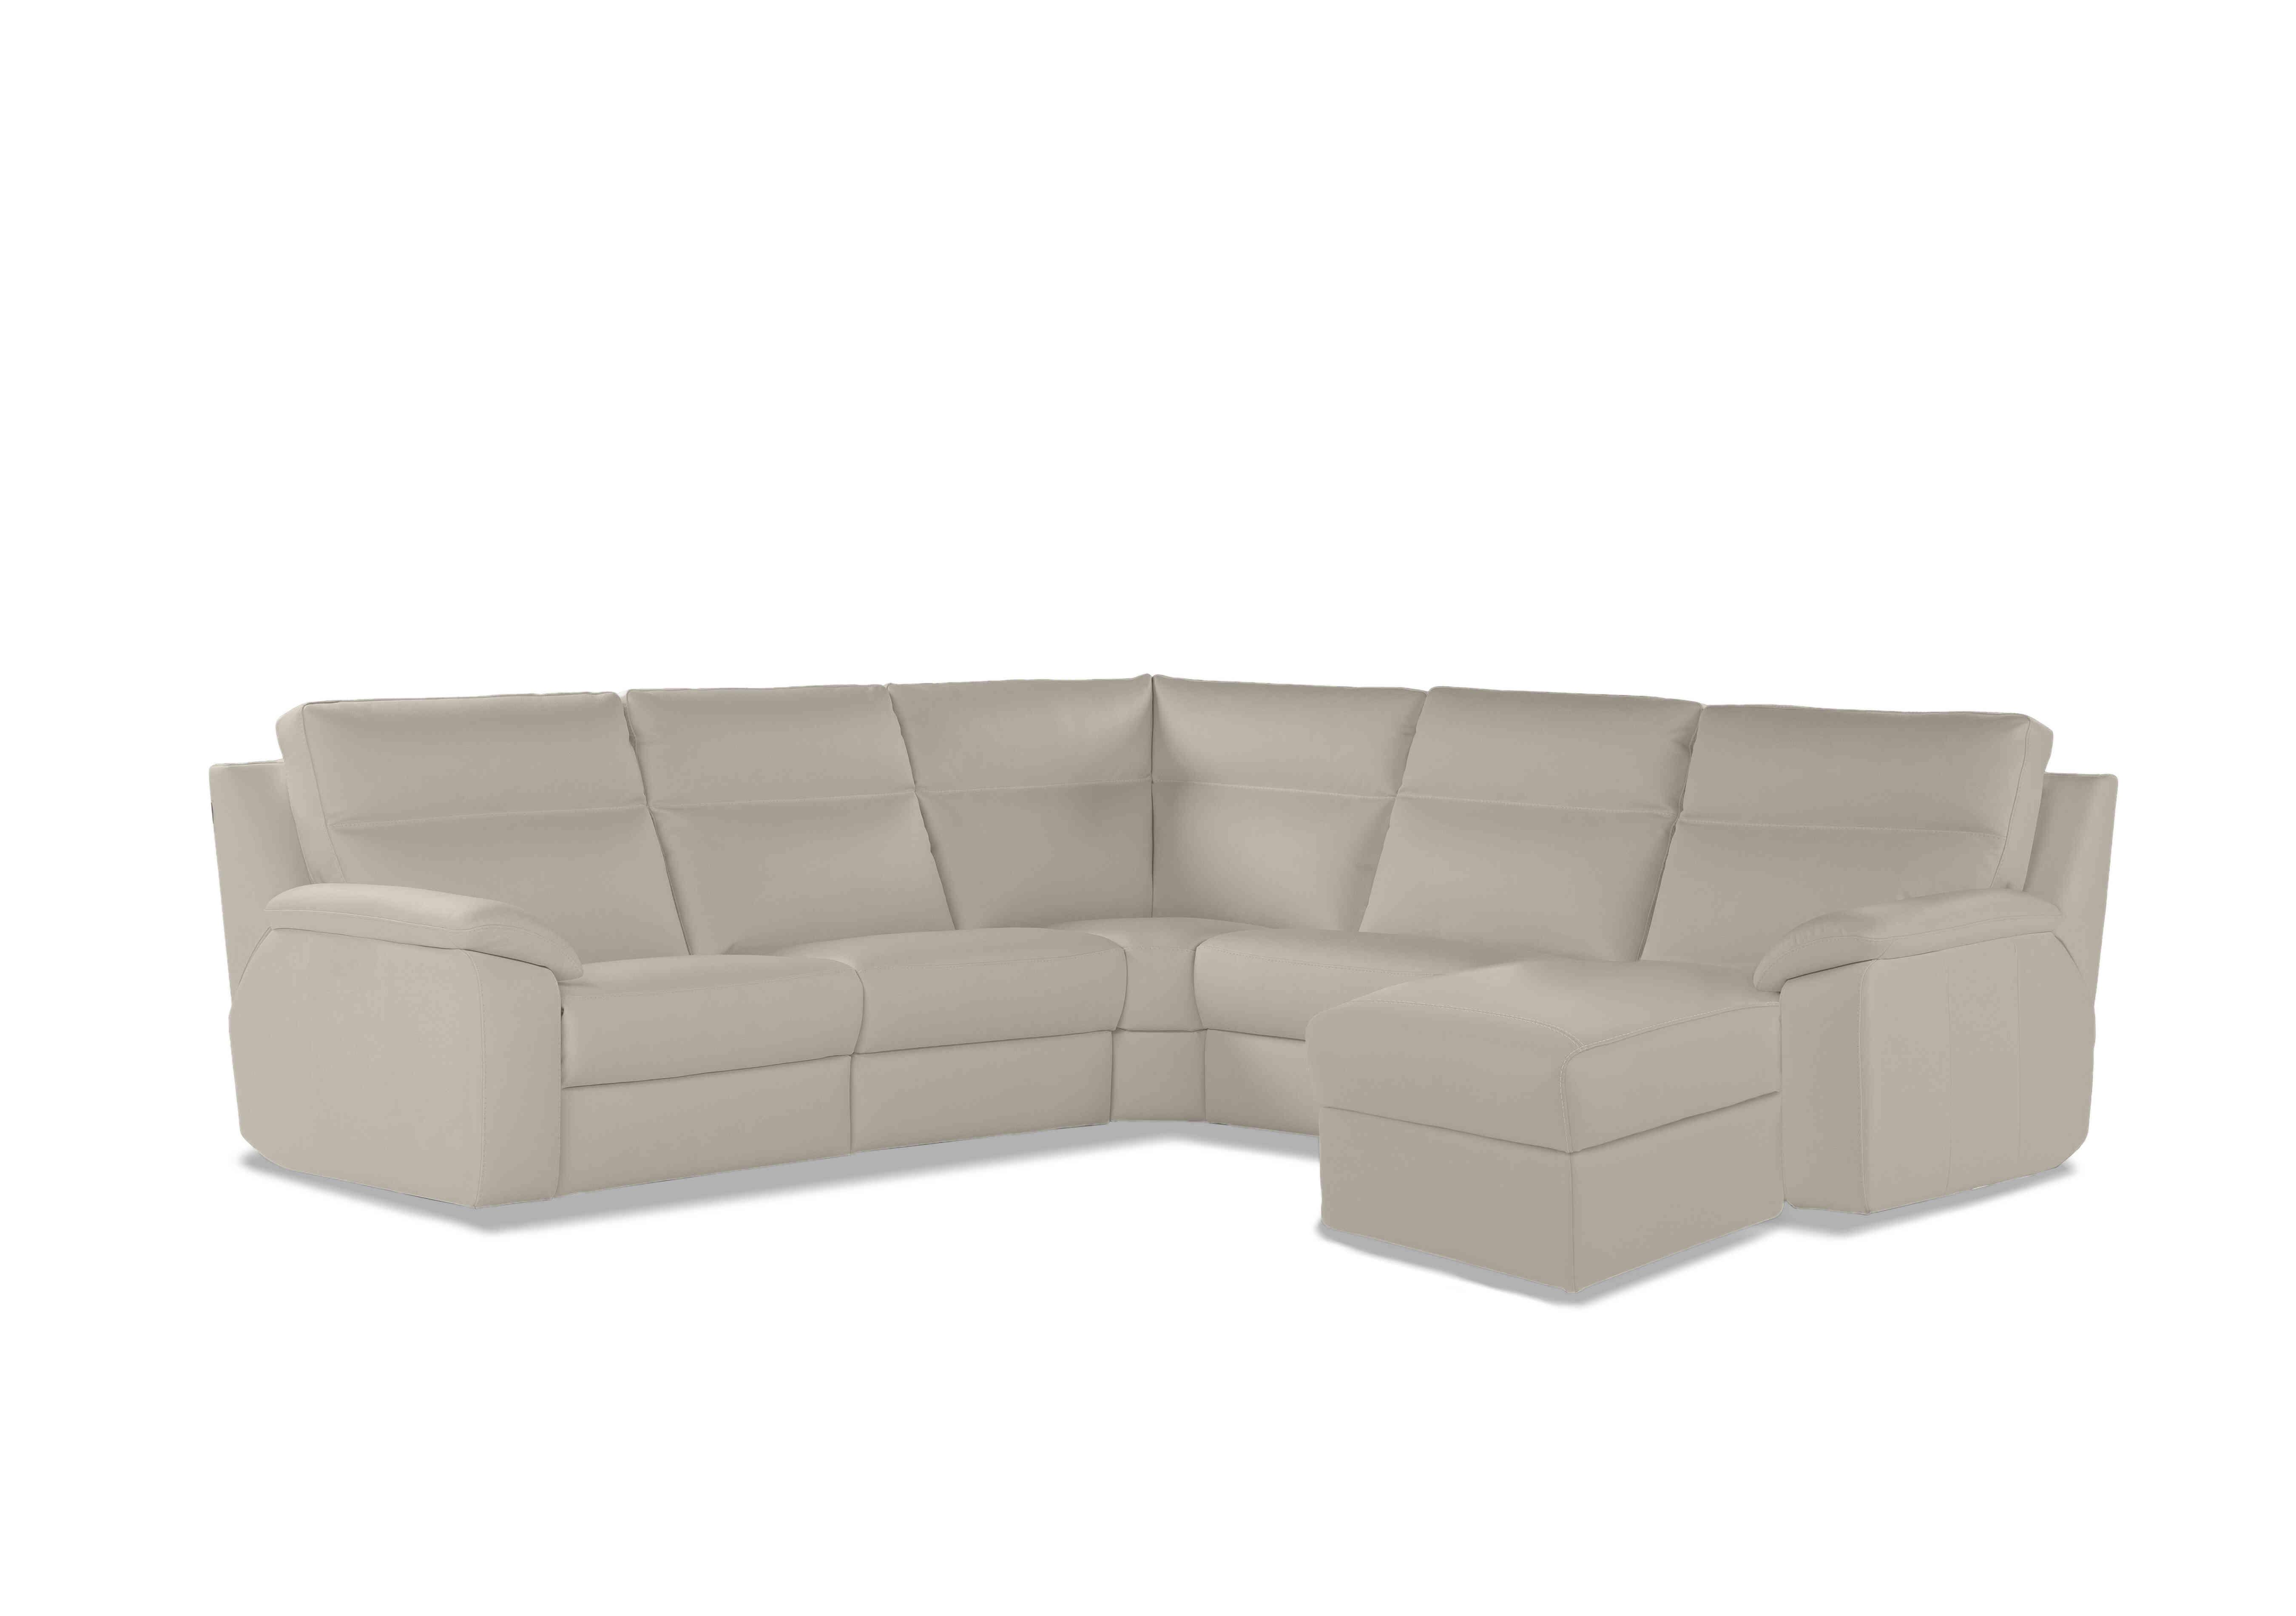 Pepino Large Leather Corner Sofa with Chaise End in Torello 371 Ice on Furniture Village